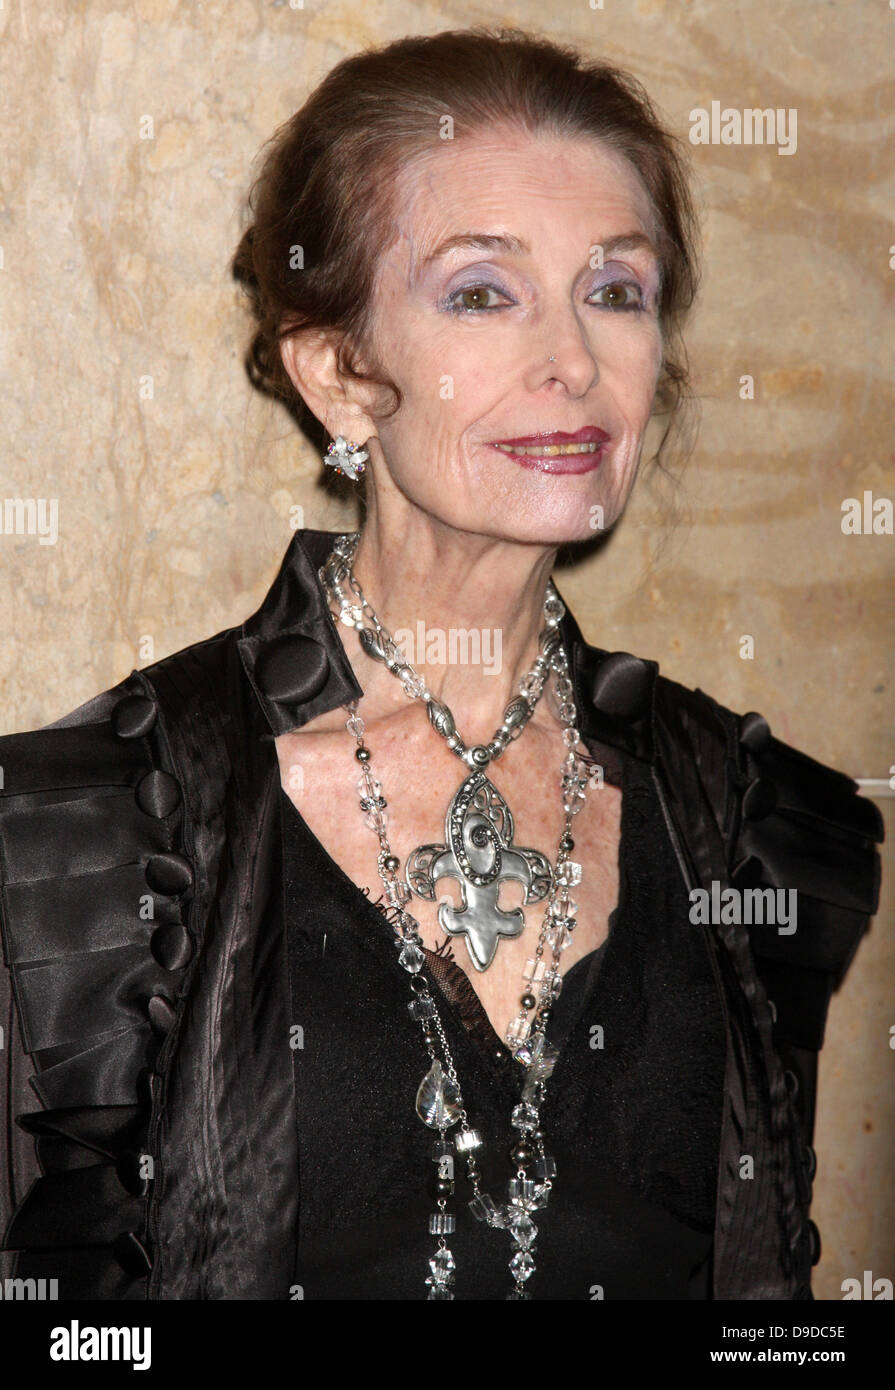 Margaret O'Brien arriving at the 25th Annual Professional Dancers Society Gypsy Awards at Beverly Hilton Hotel. Beverly Hills, California - 27.03.11 Stock Photo